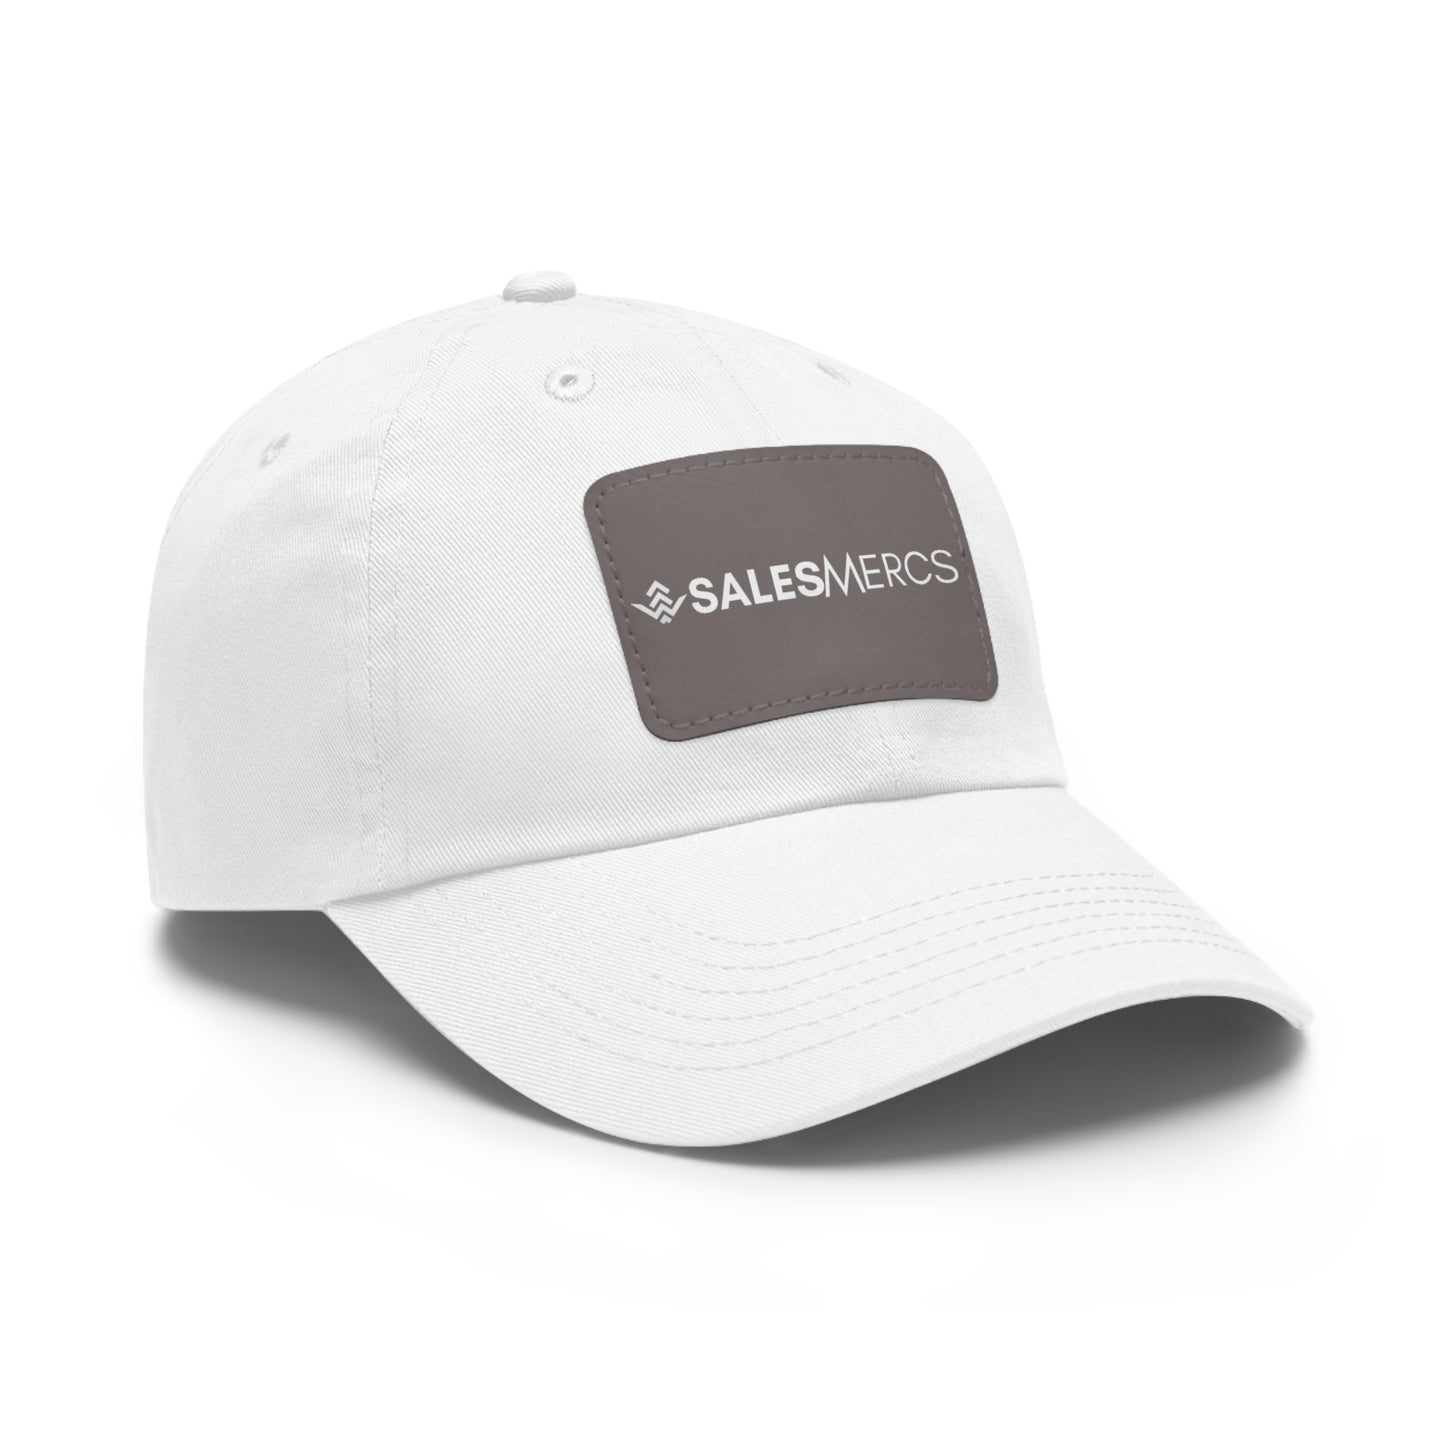 SalesMercs Hat with Leather Patch (White)